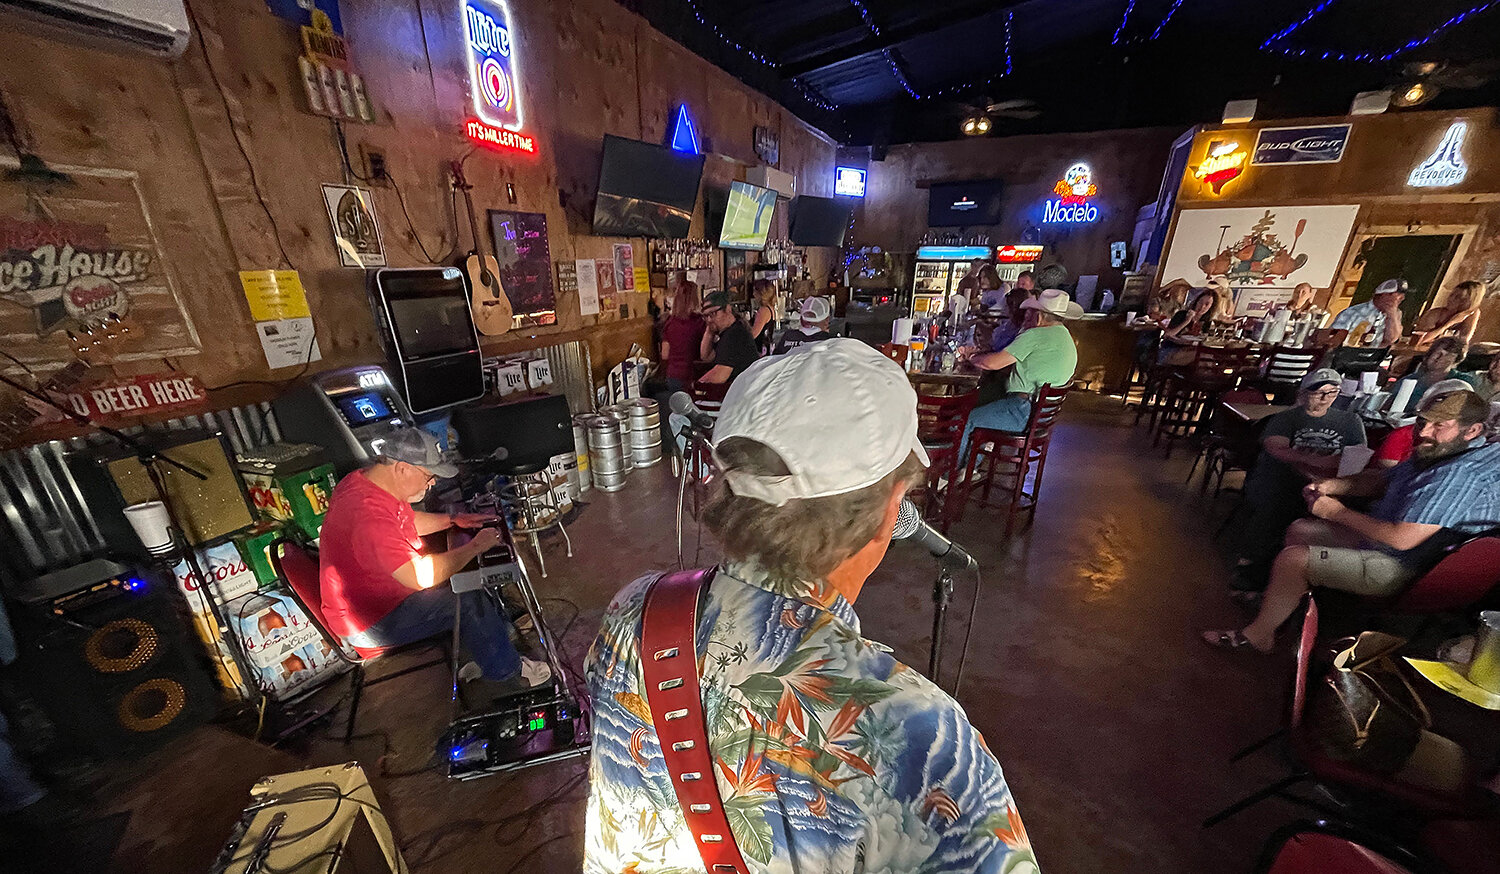 The Tuesday night jam sessions at Brock’s Food and Drink in Acton is much like the tavern’s owner: fun, creative and spontaneous.